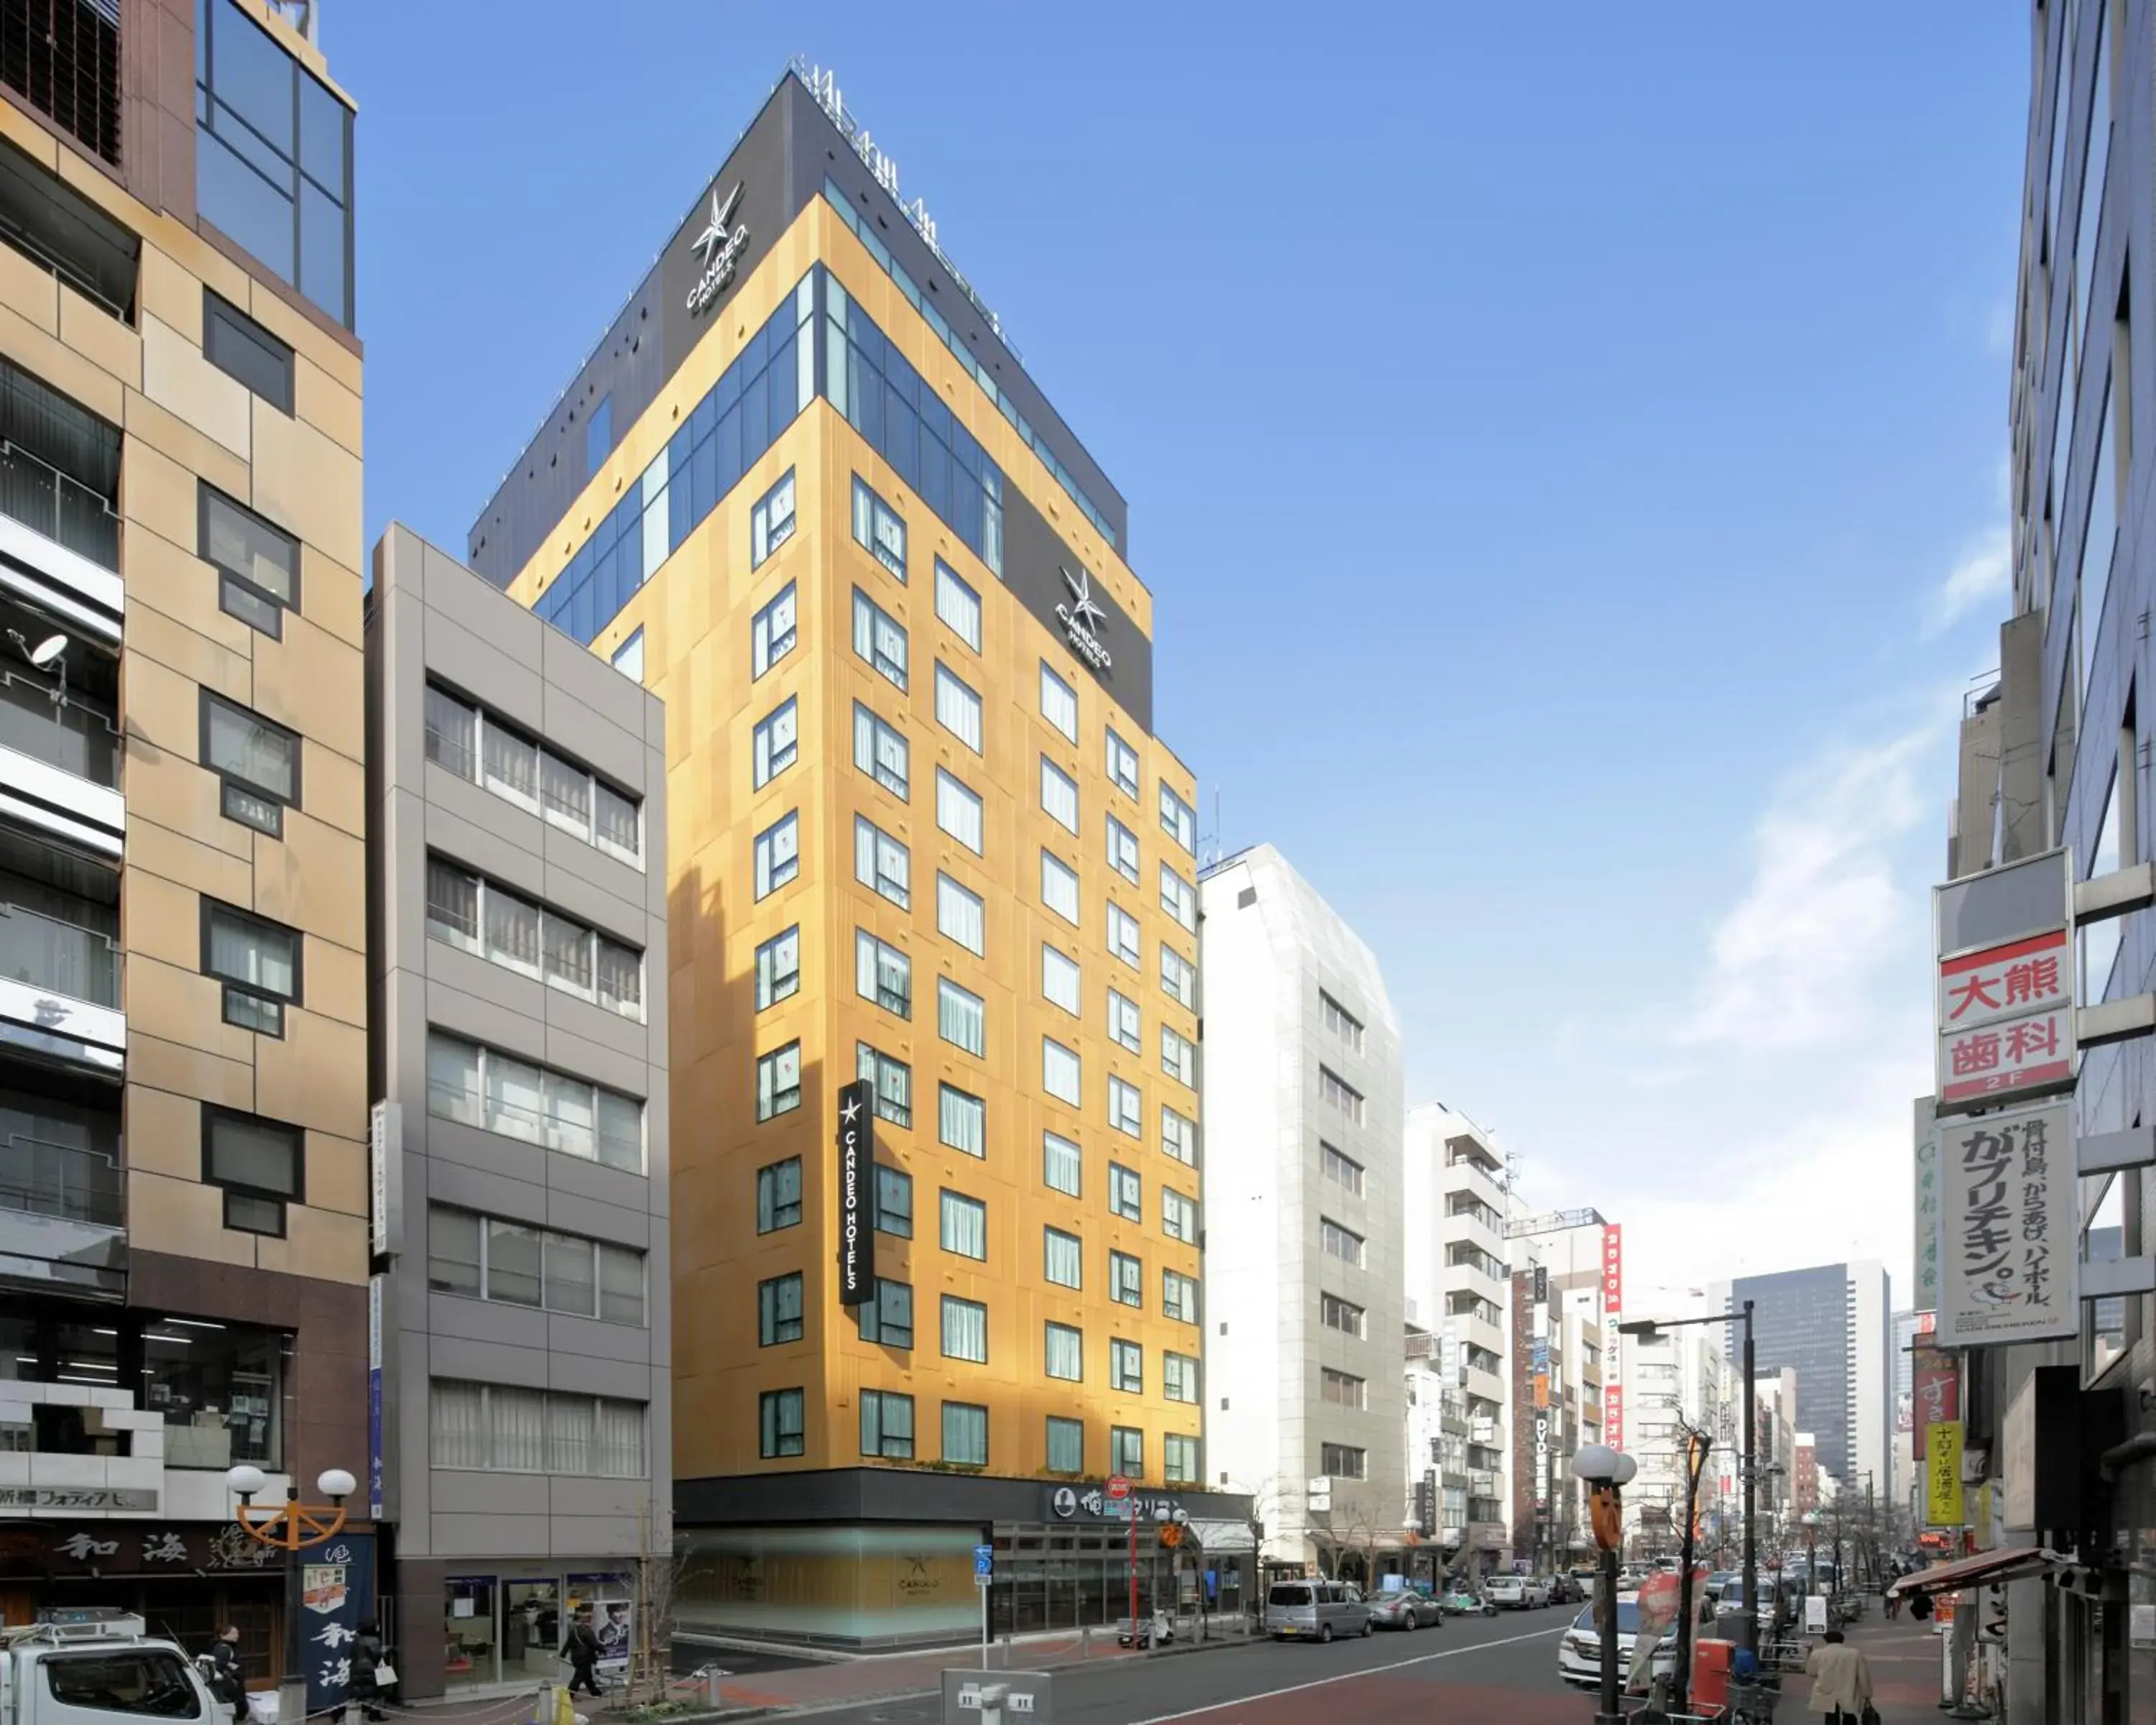 Property building in Candeo Hotels Tokyo Shimbashi